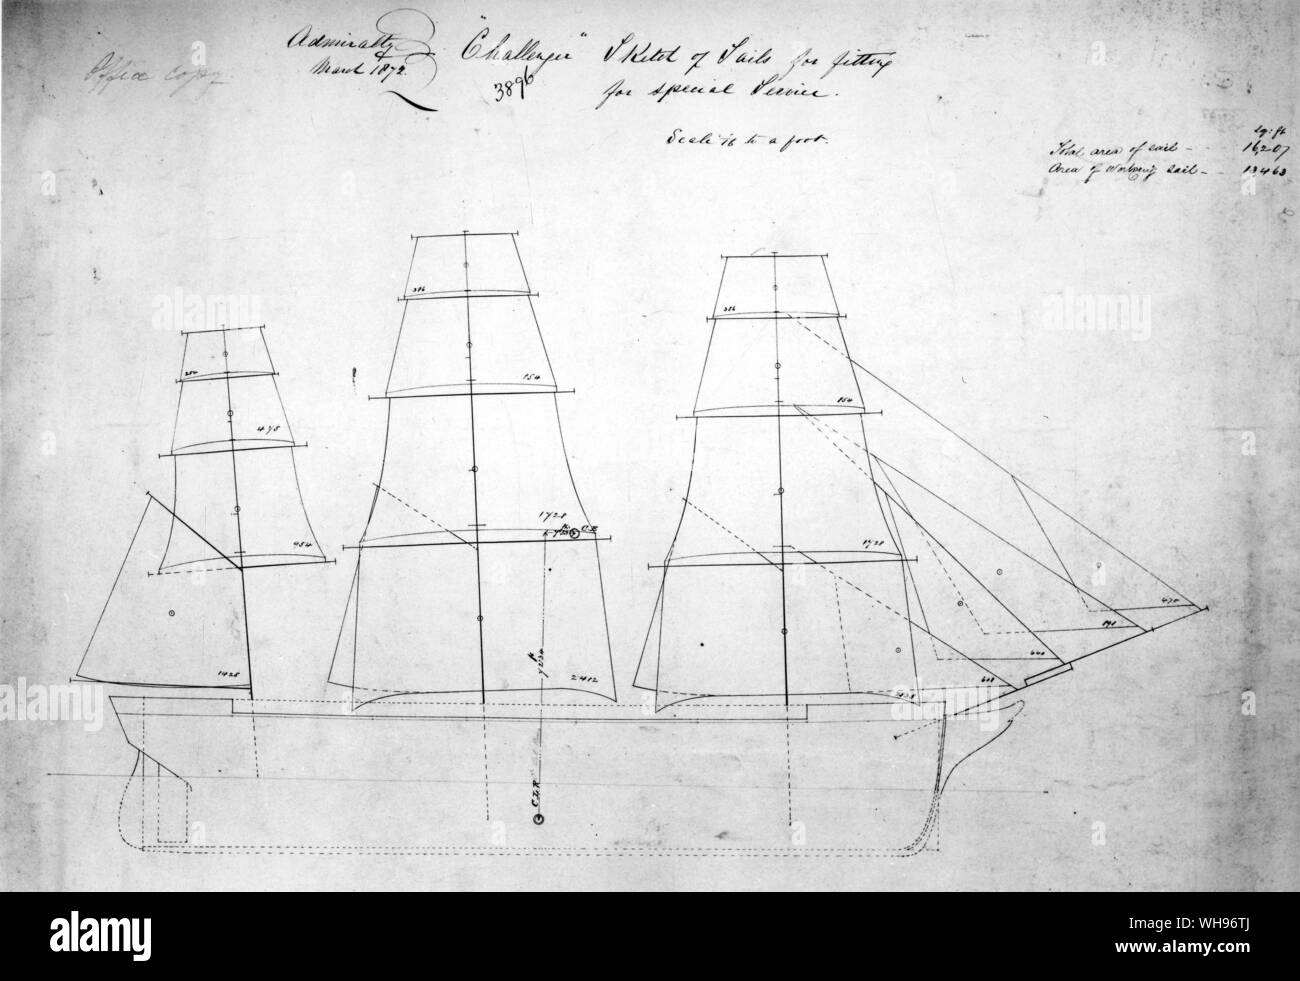 HMS Challenger: When she was fitted out for special service in 1872, she carried over 16,000 square feet of sails. On the original plan is a superimposed key. 1. fore-sail. 2. fore topsail. 3. fore topgallant. 4. fore royal. 5. main sail. 6. main topsail. 7. main topgallant. 8. main royal. 9. mizen topsail. 10. mizen gallant. 11. mizen royal. 12. flying job. 13. outer jib. 14. inner job. 15. fore topmast staysail. 16. main topmast staysail. 17. mizen staysail. 18. spanker. Not all the fore and aft sails are shown. Stock Photo